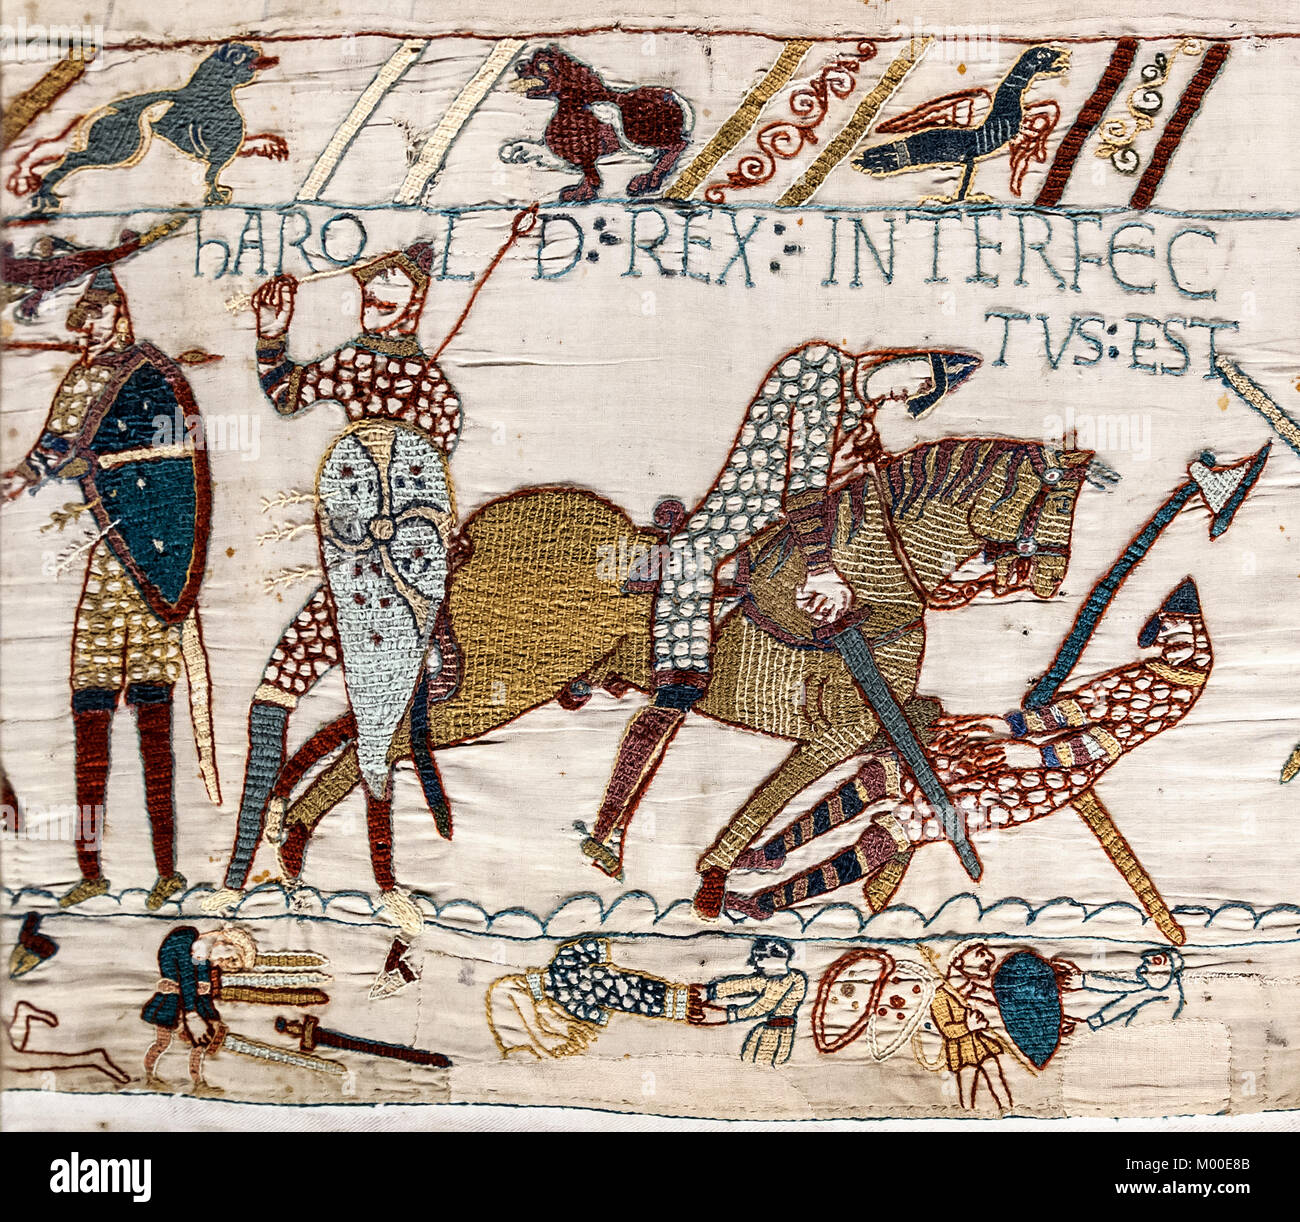 Bayeux Tapestry, A segment of the Bayeux Tapestry, Harold's death. Legend above: Harold rex interfectus est, 'King Harold is killed' Stock Photo